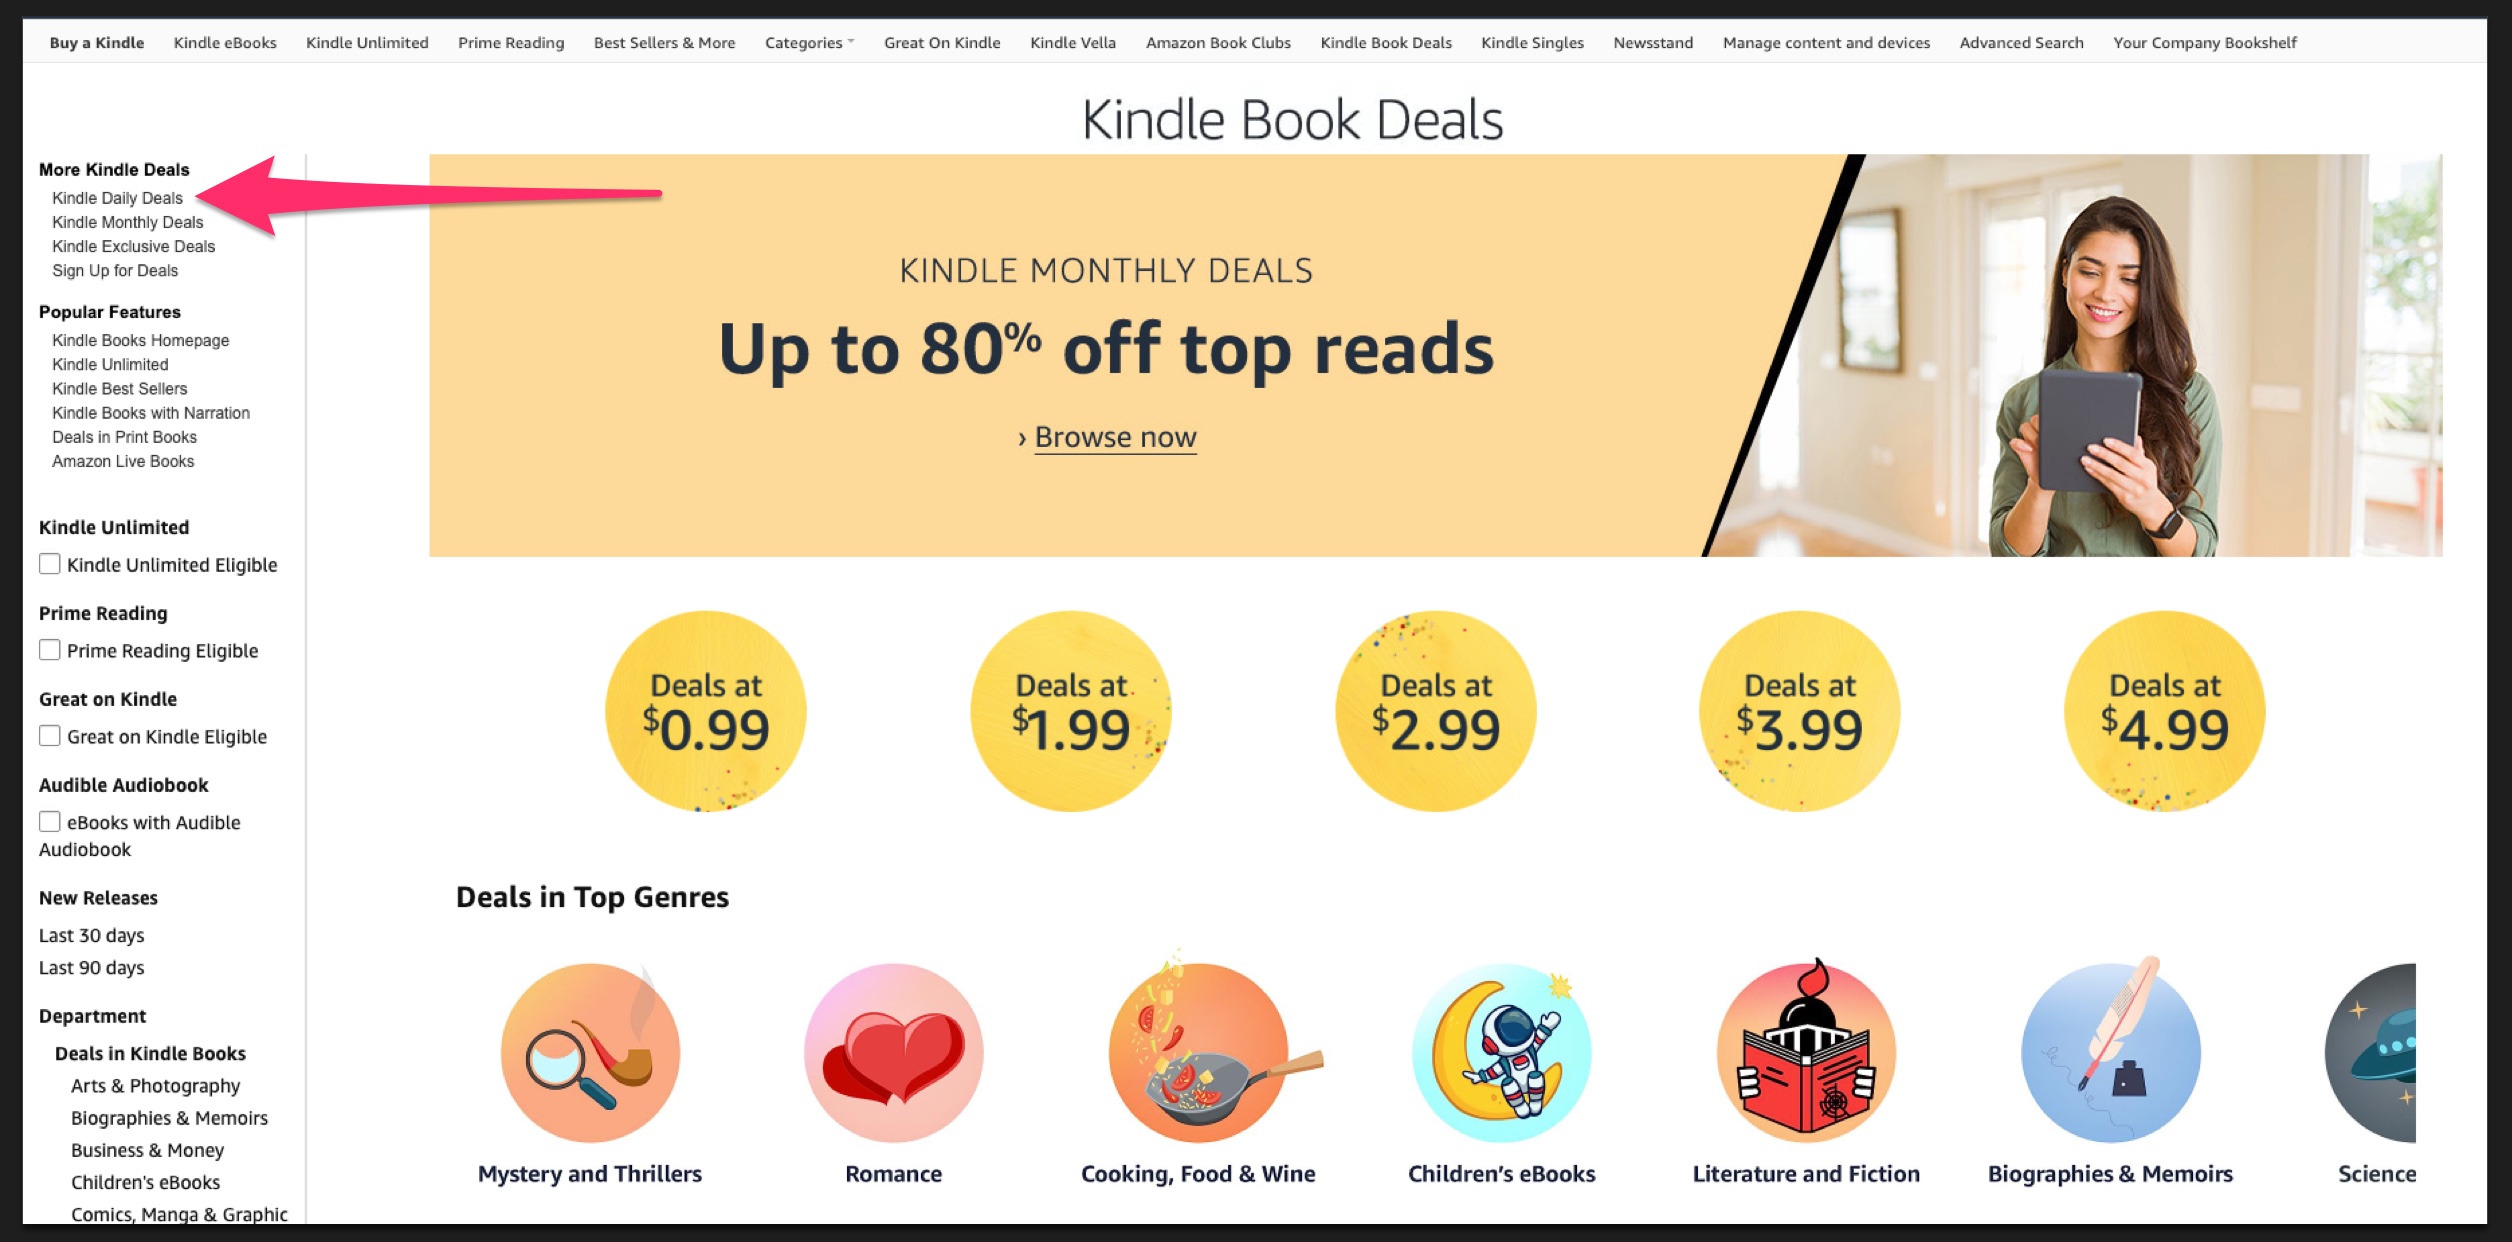 How to Find Kindle Daily Deals for Romance Books - Step 5